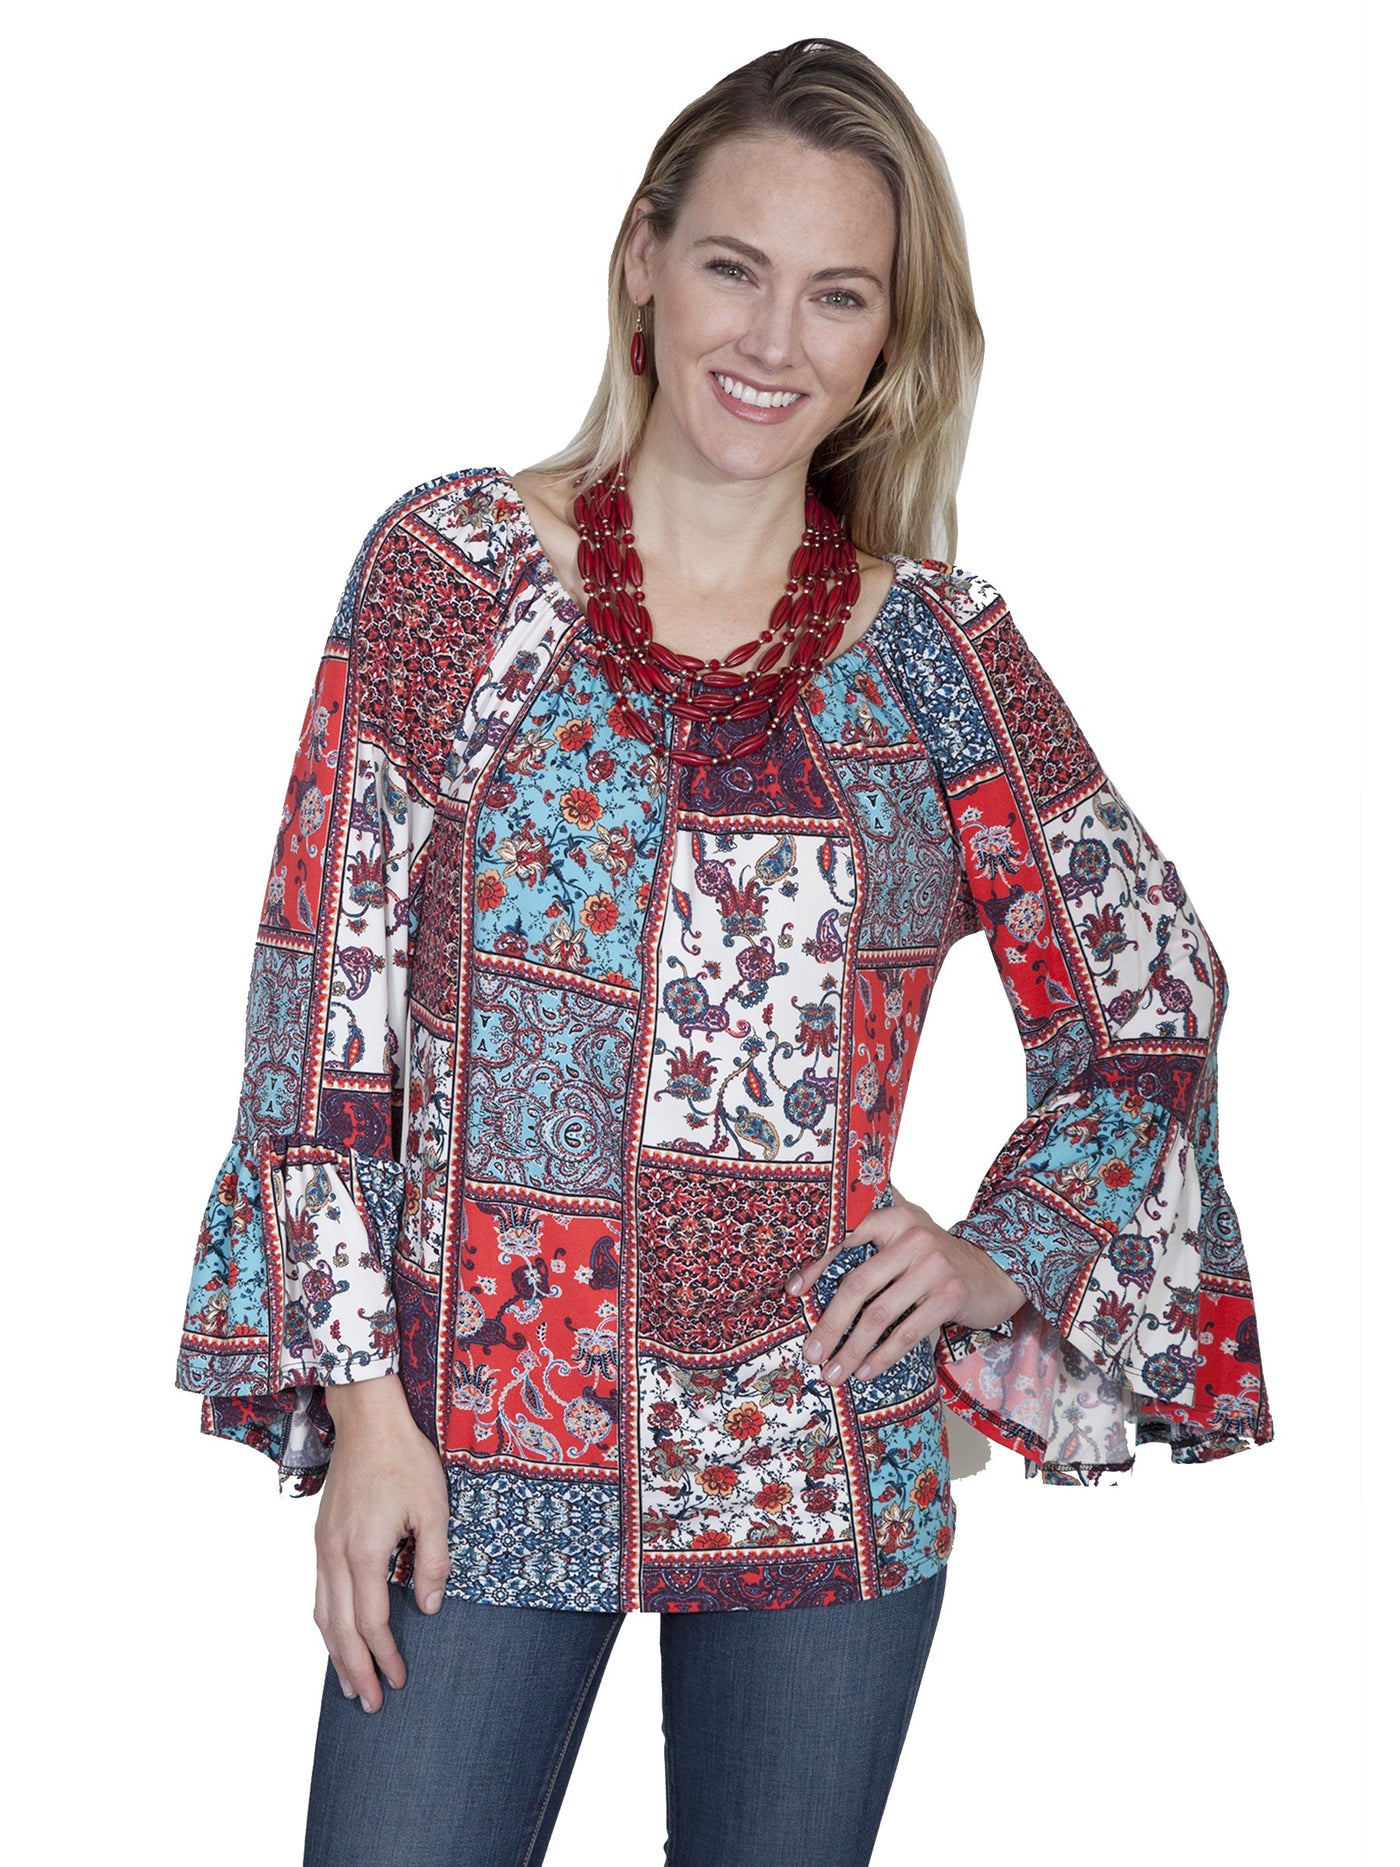 Prairie Colorful Blouse in Multi - SOLD OUT